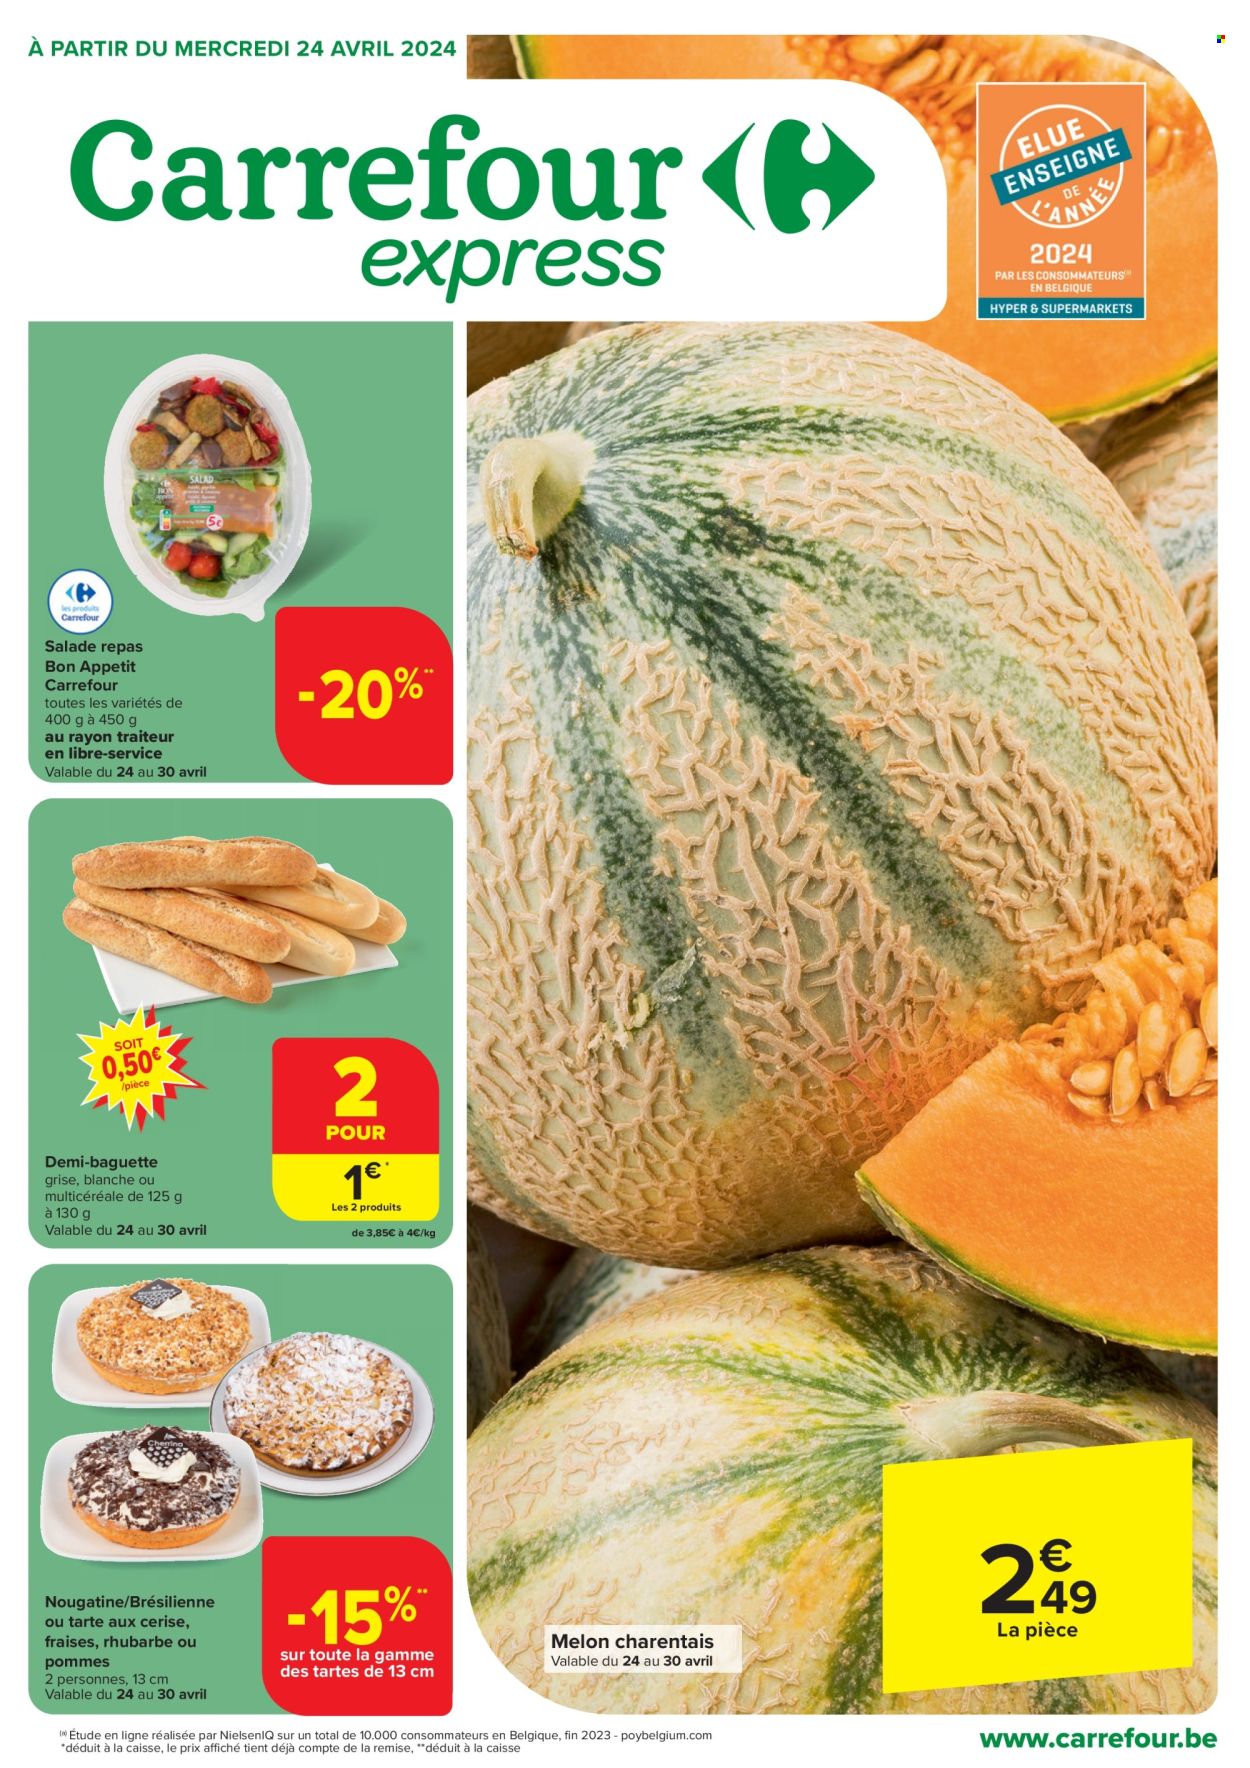 Catalogue Carrefour express - 24.4.2024 - 6.5.2024. Page 1.